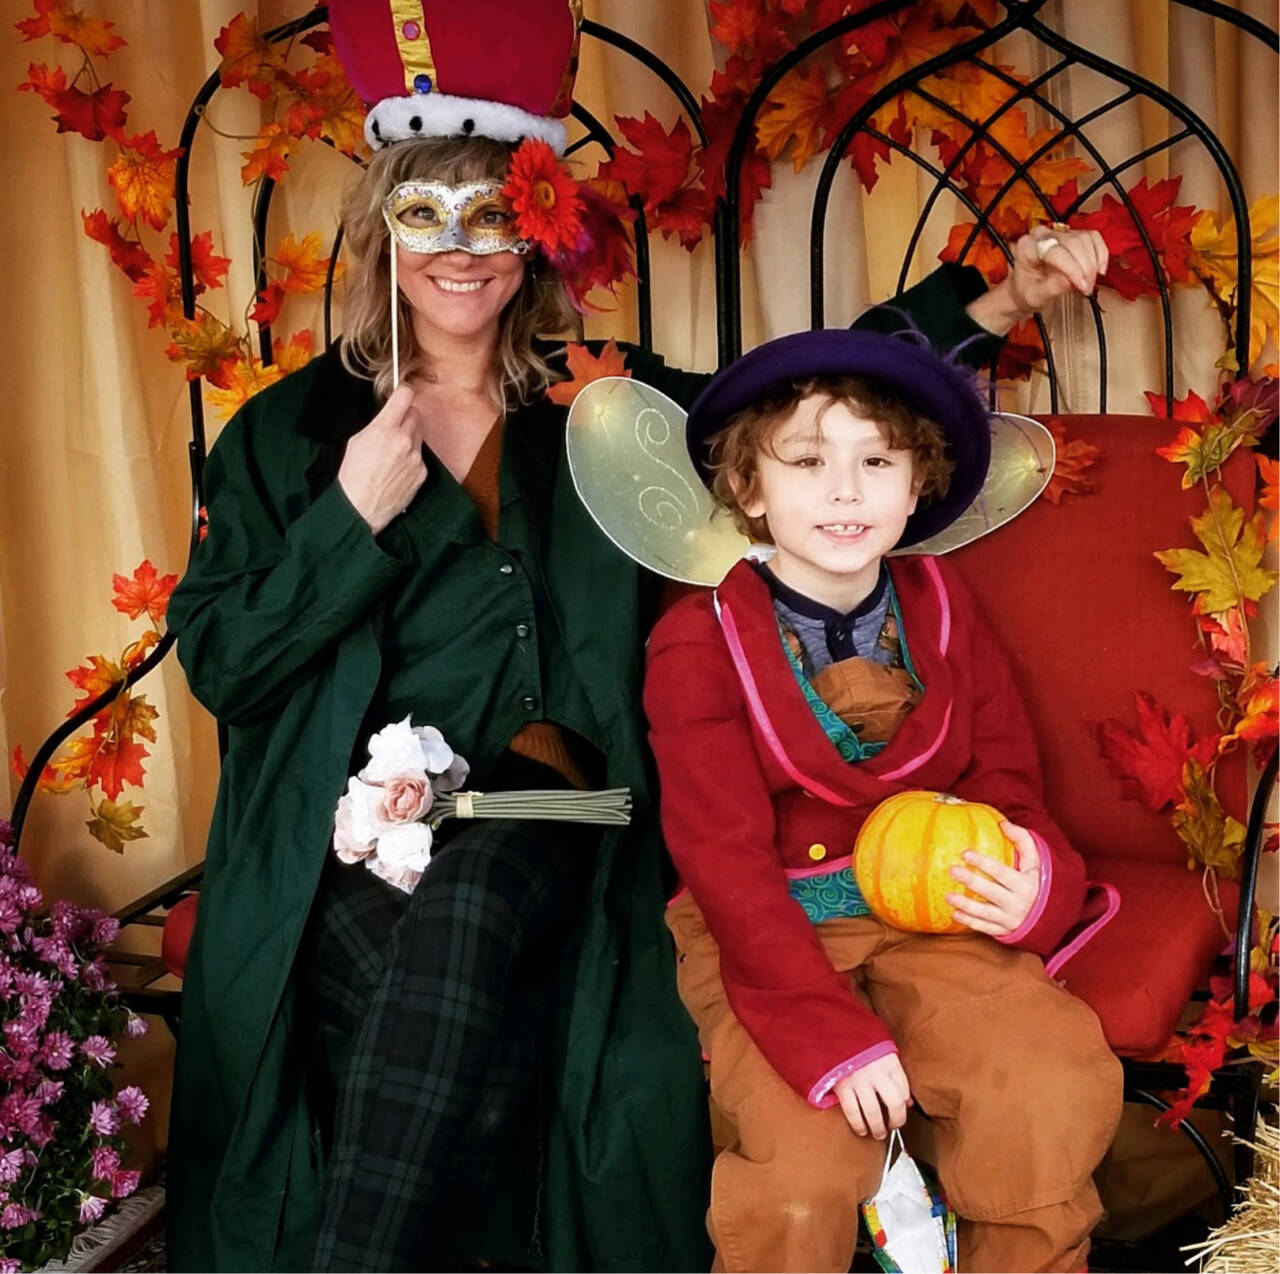 Photo courtesy of Sequim Farmers & Artisans Market / Kelsey Husted and Lucian Alexander Parker have fun at the Olympic Theatre Arts’ costume booth. Check out family-friendly activities at the Sequim Farmers & Artisans Market’s November Market on Nov. 19.